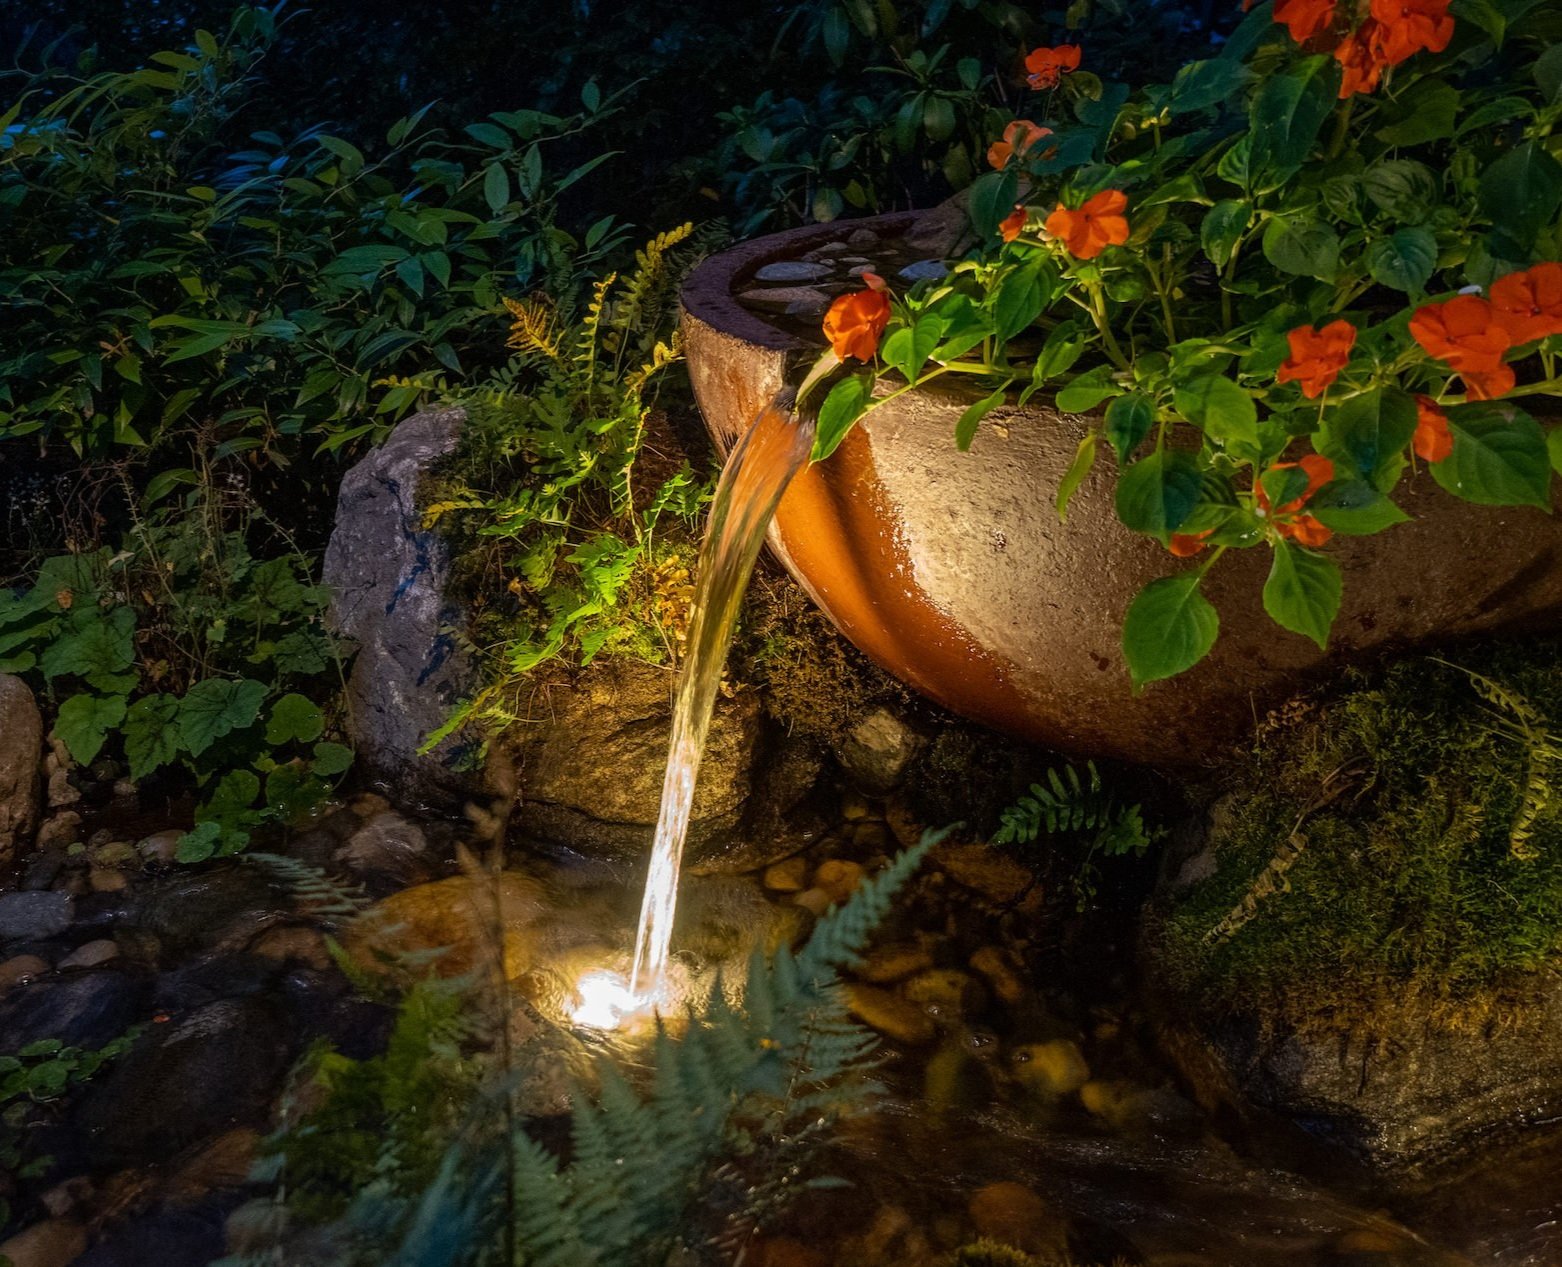 A Pondless Water Feature Can Bring Instant Zen to Your Outdoor